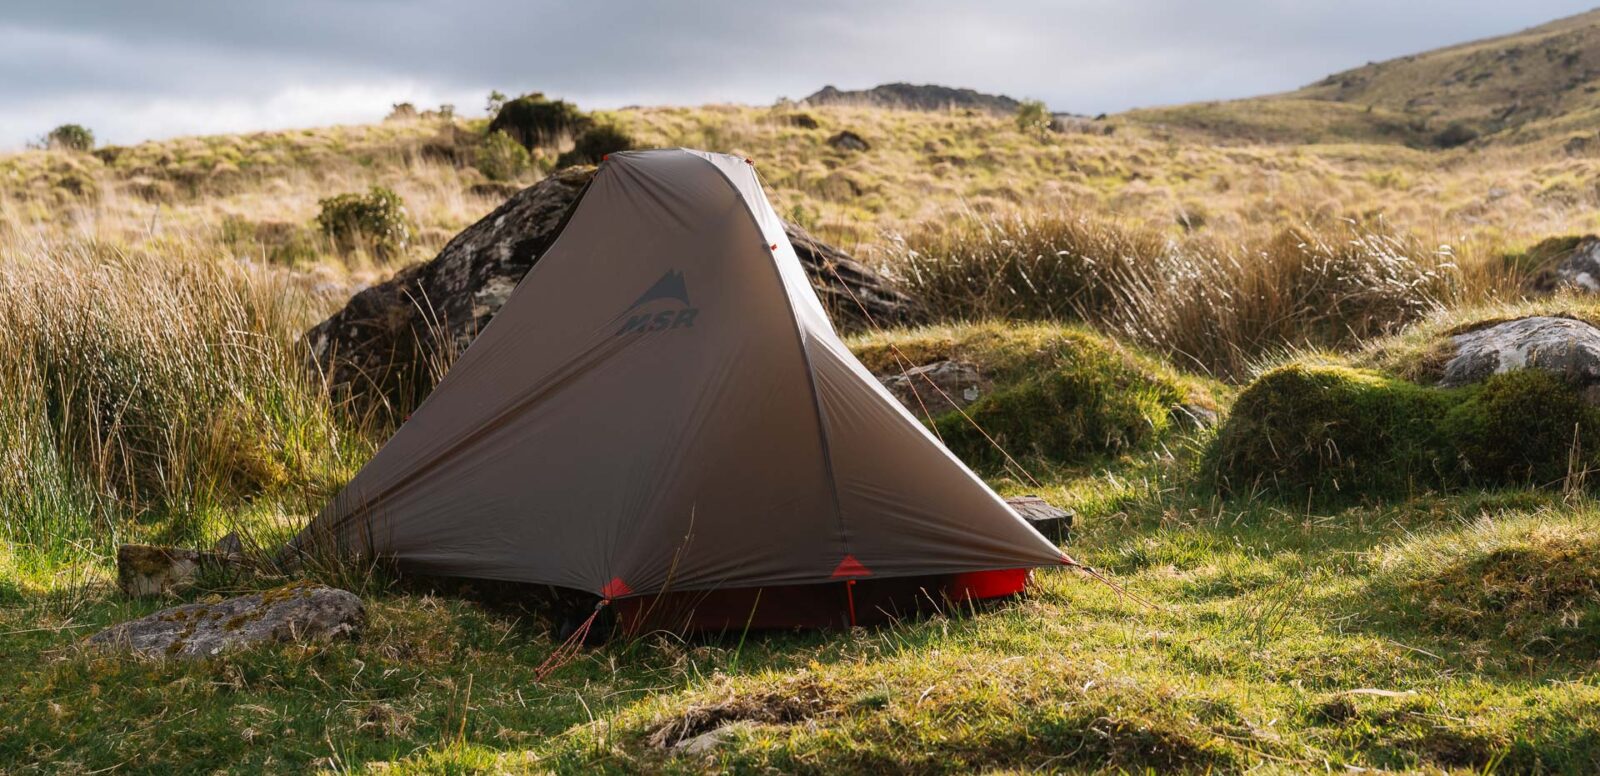 camping tent on grassy surface